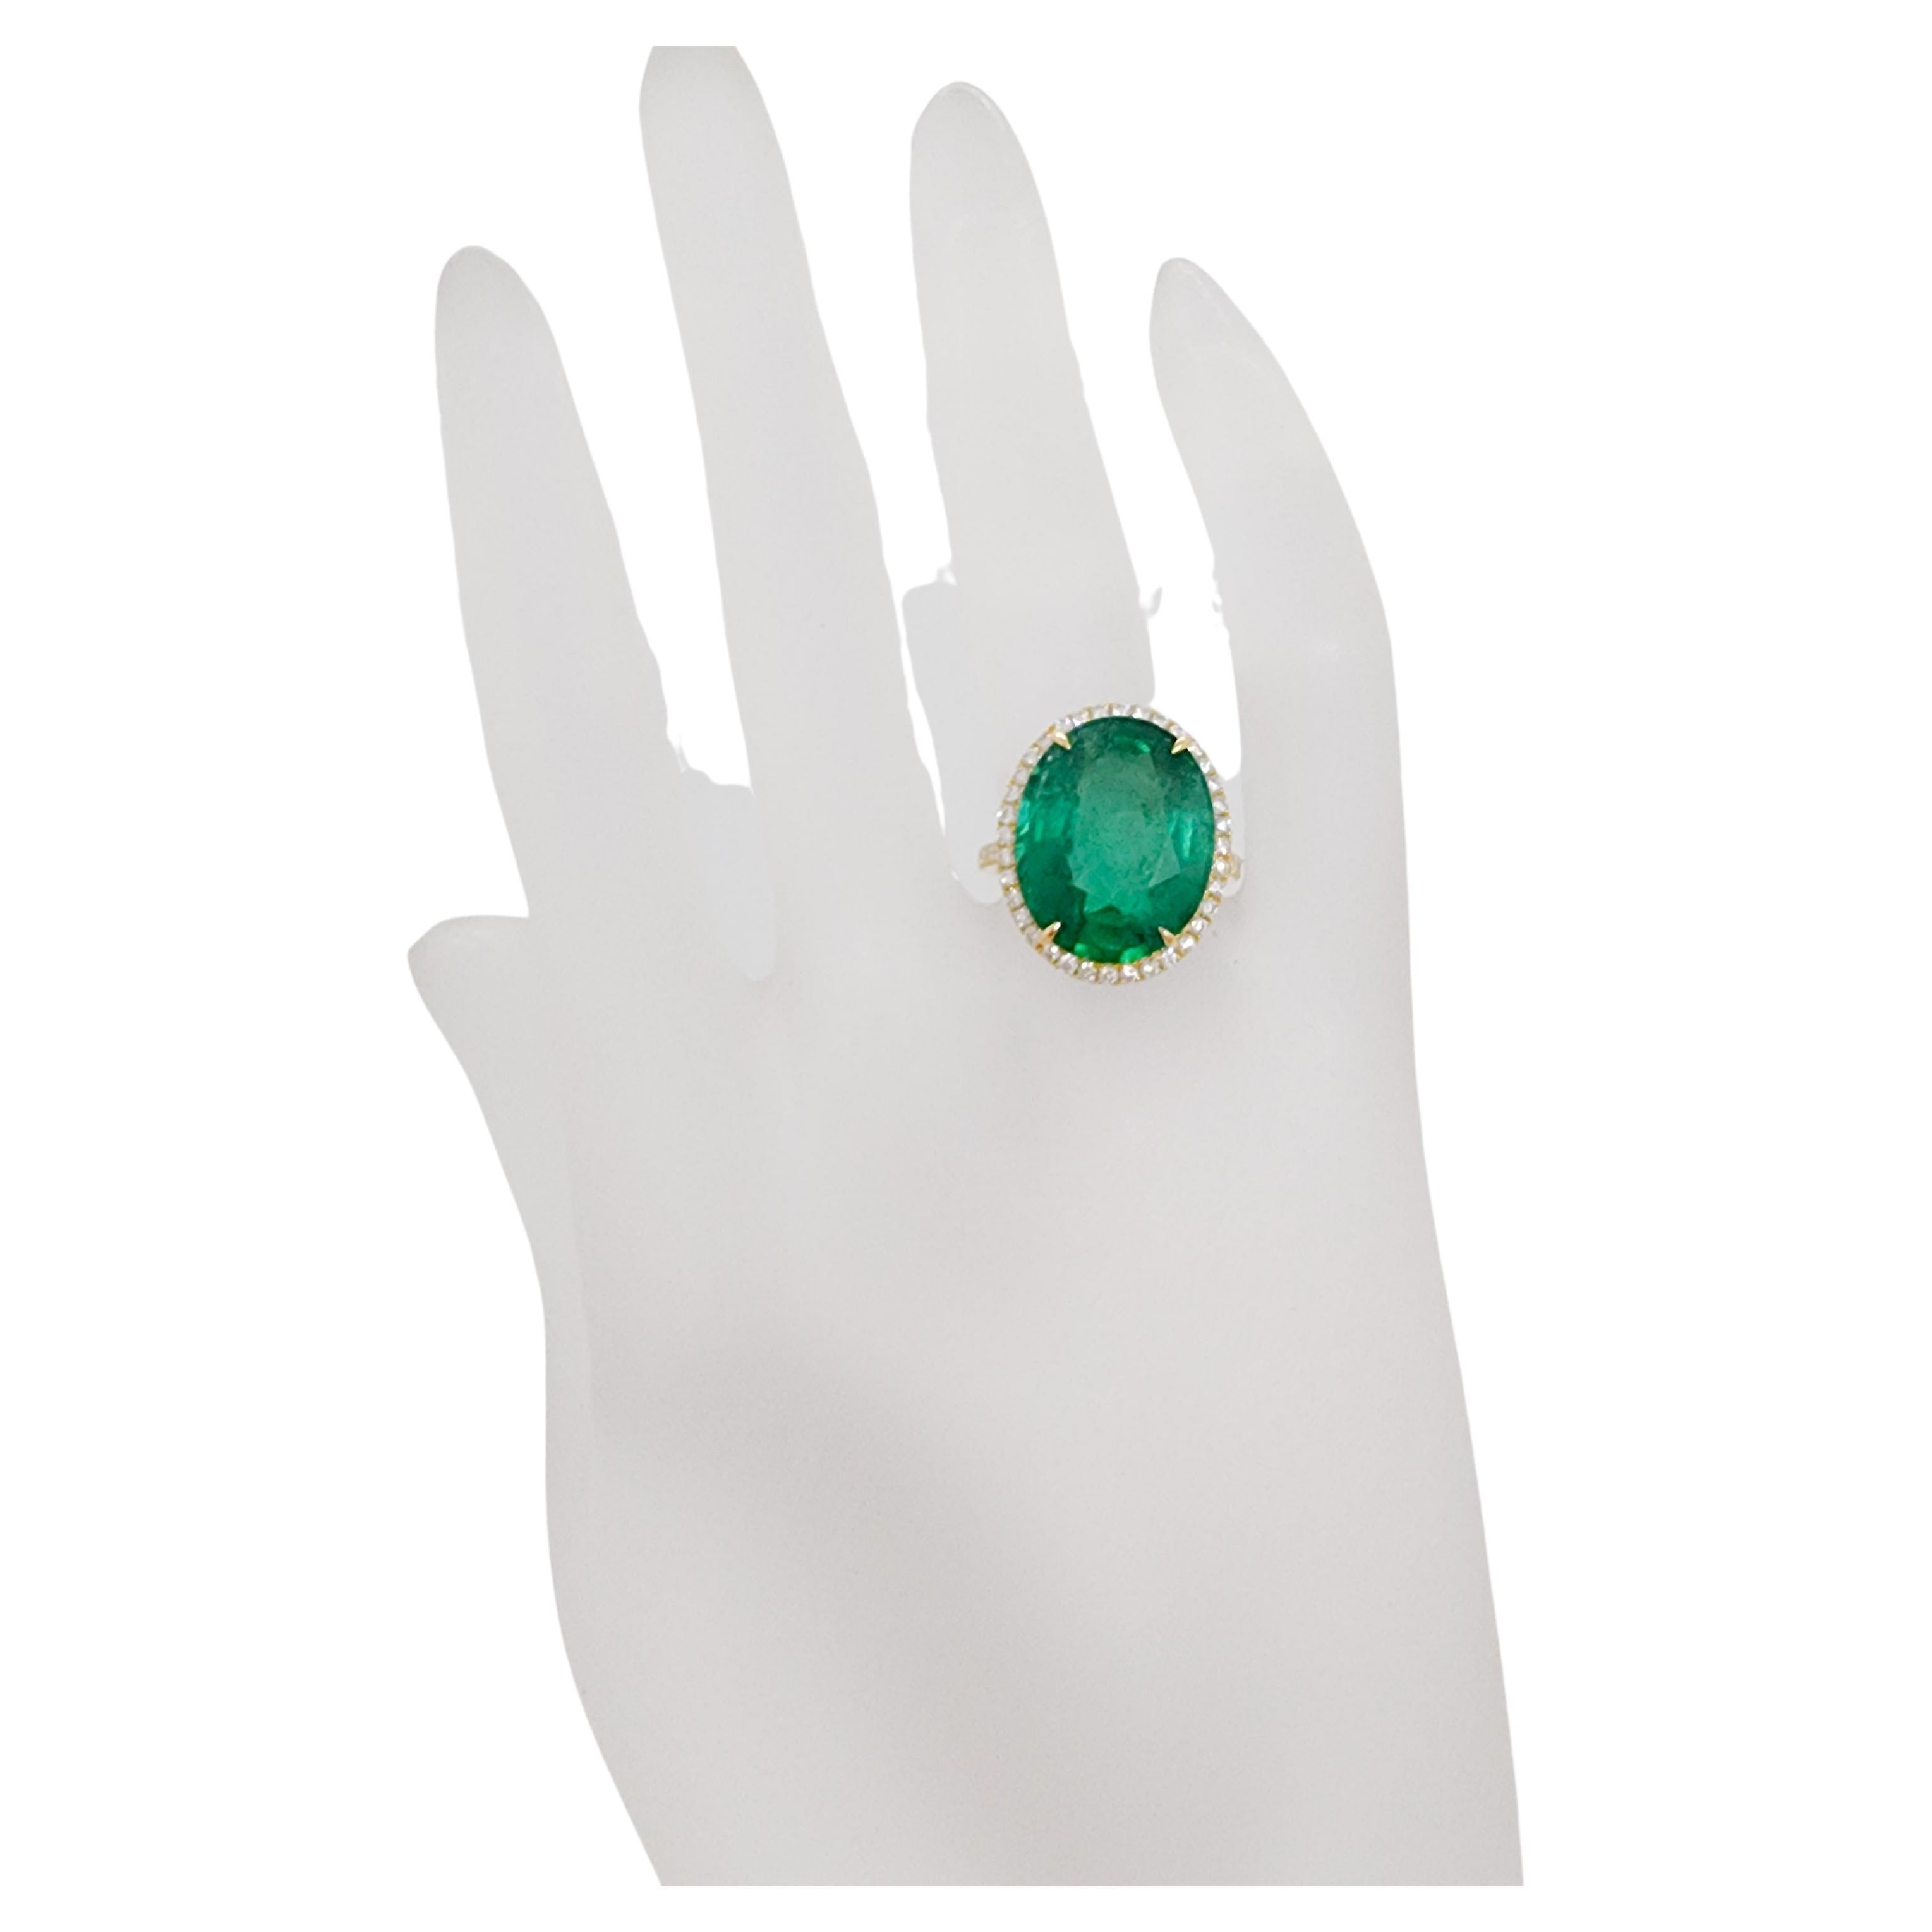 Absolutely gorgeous 10.68 ct. emerald oval with 0.90 ct. good quality, white, and bright diamond rounds.  Handmade in 18k yellow gold.  Ring size 6.25.